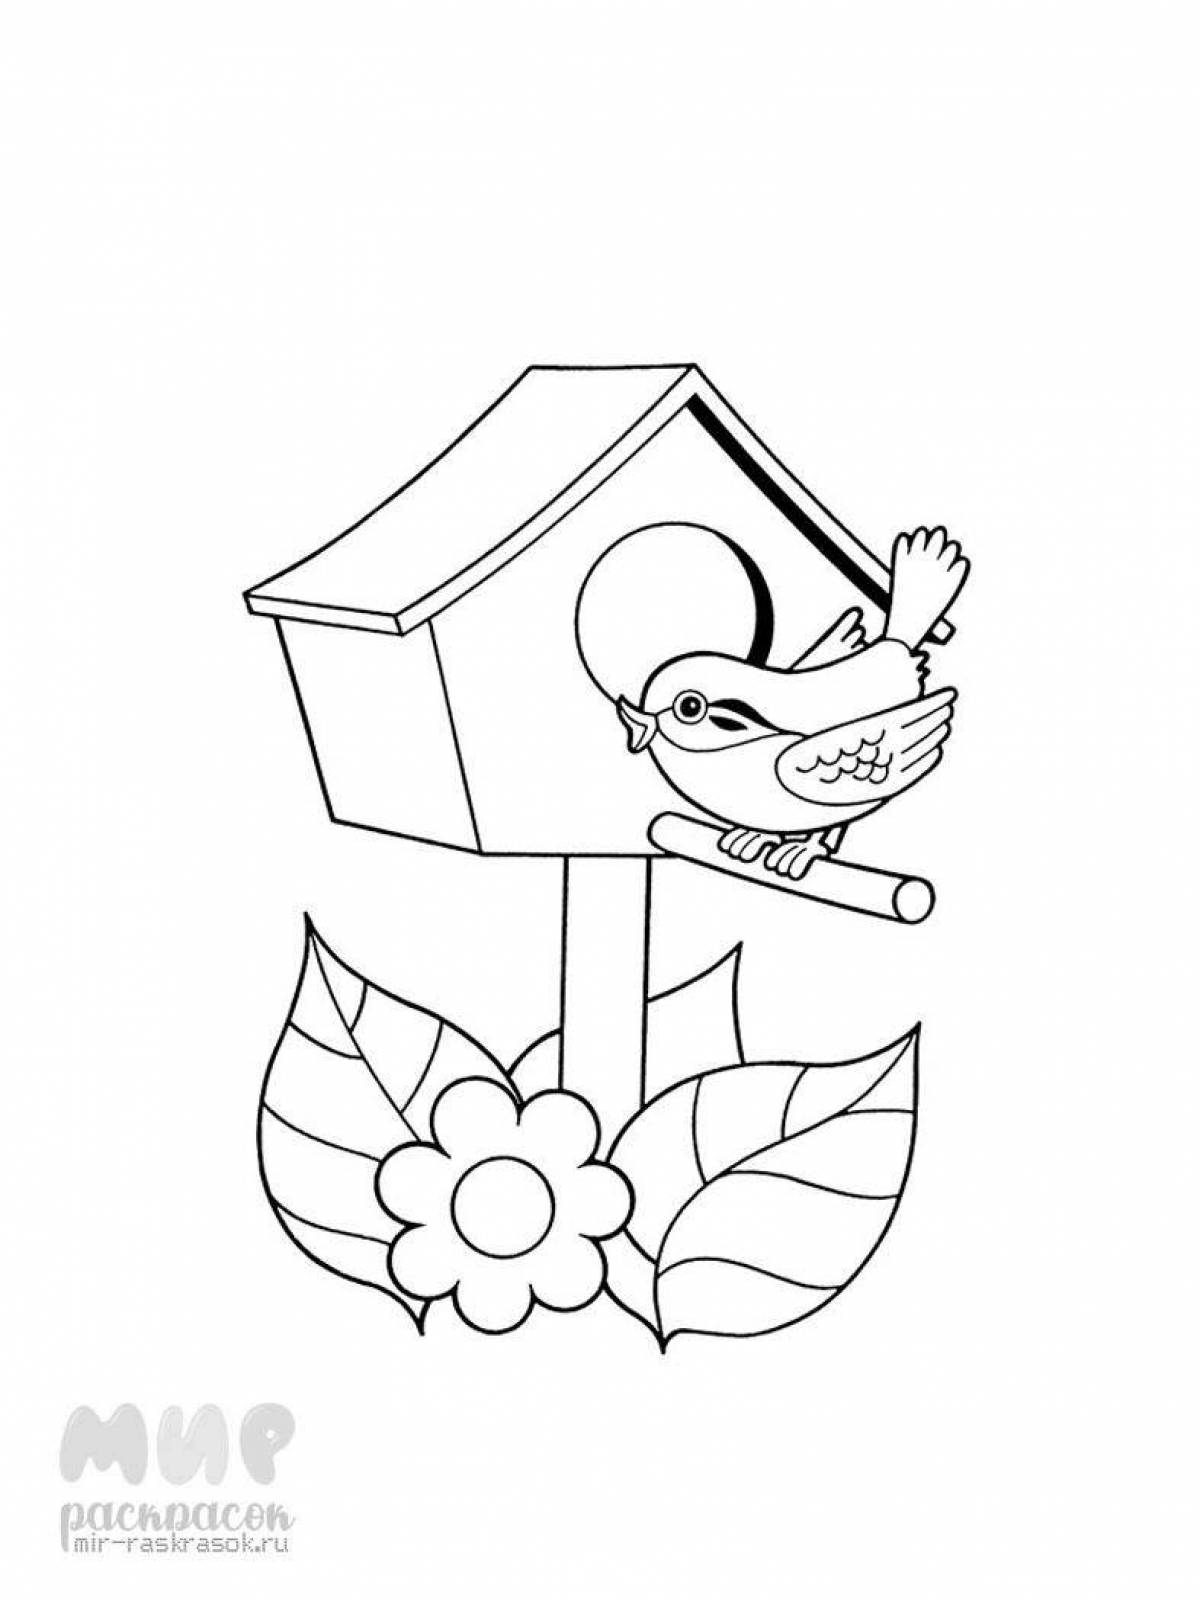 Striking birdhouse coloring page